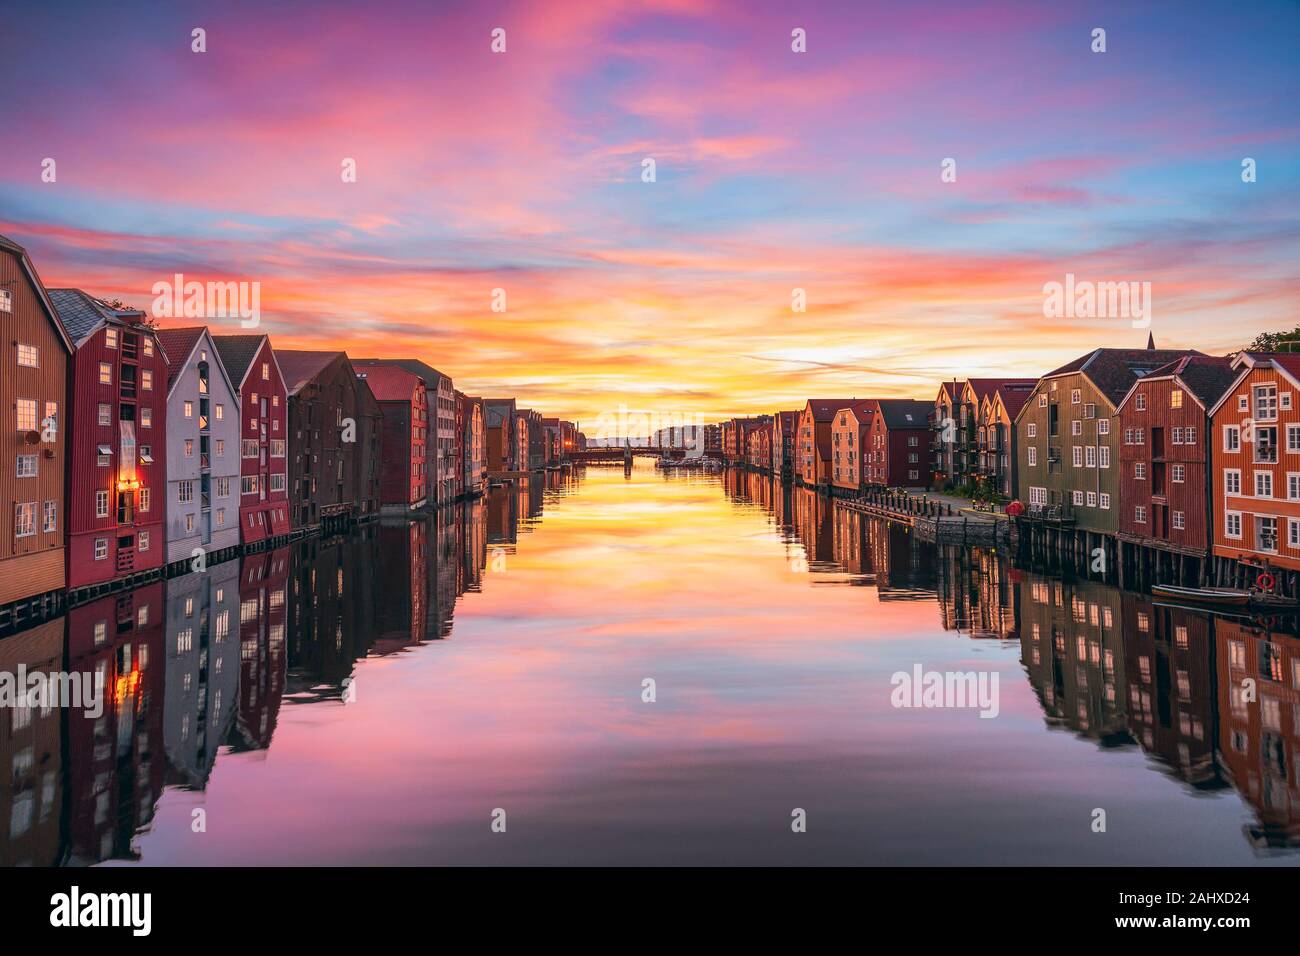 View of colorful timber houses surrounding river Nidelva in the city of Trondheim at sunset. View from Old Town Bridge. Trondelag county. Norway Stock Photo